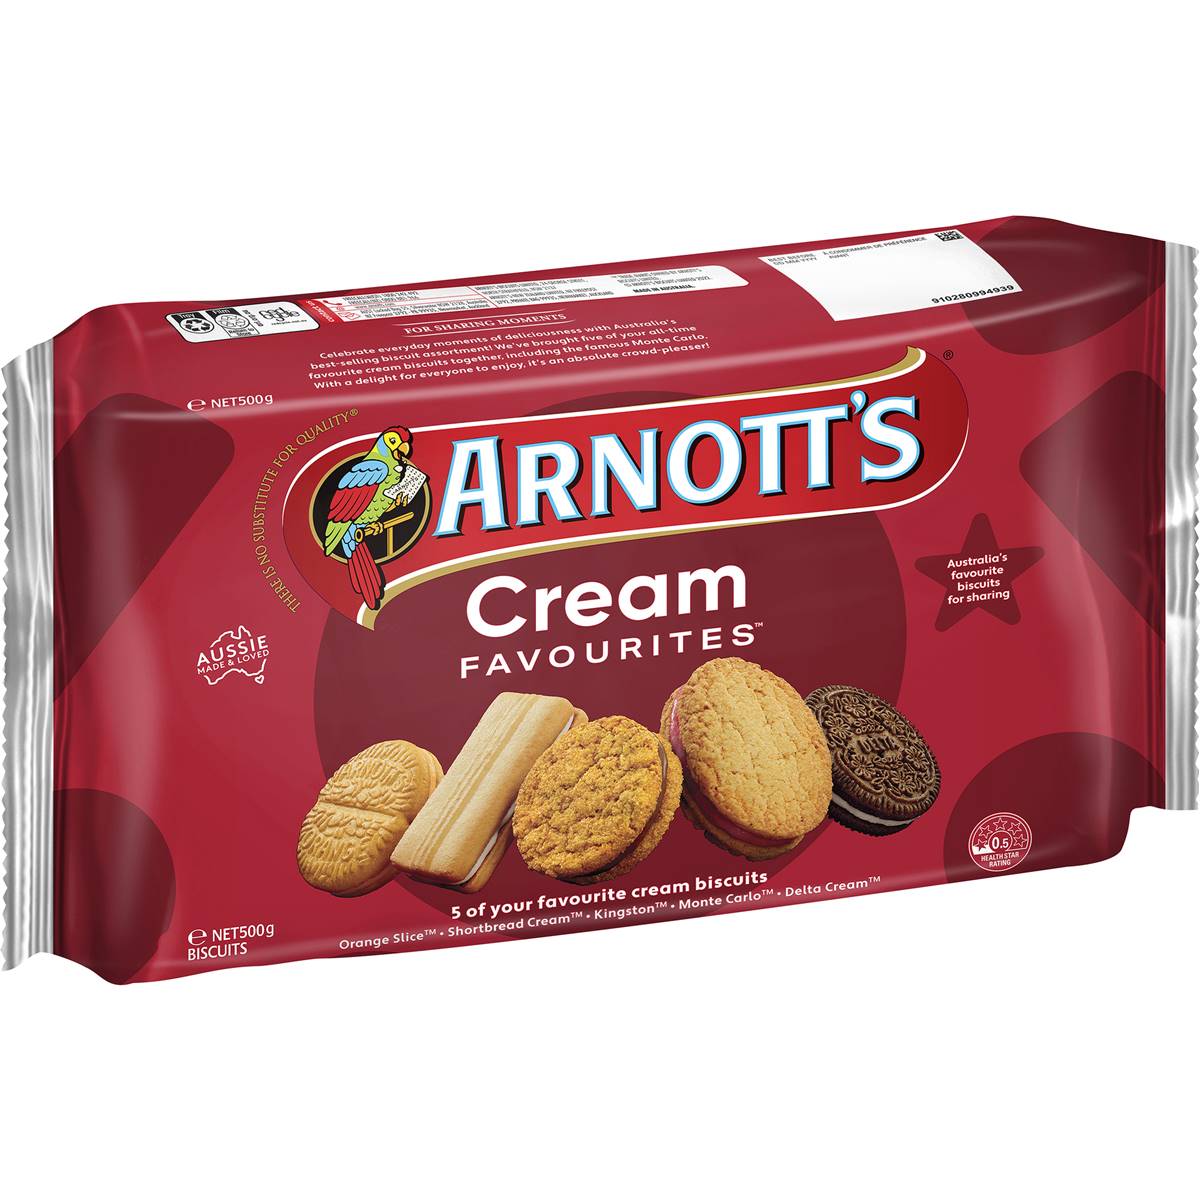 Calories in Arnott's Assorted Creams Biscuits Variety Pack